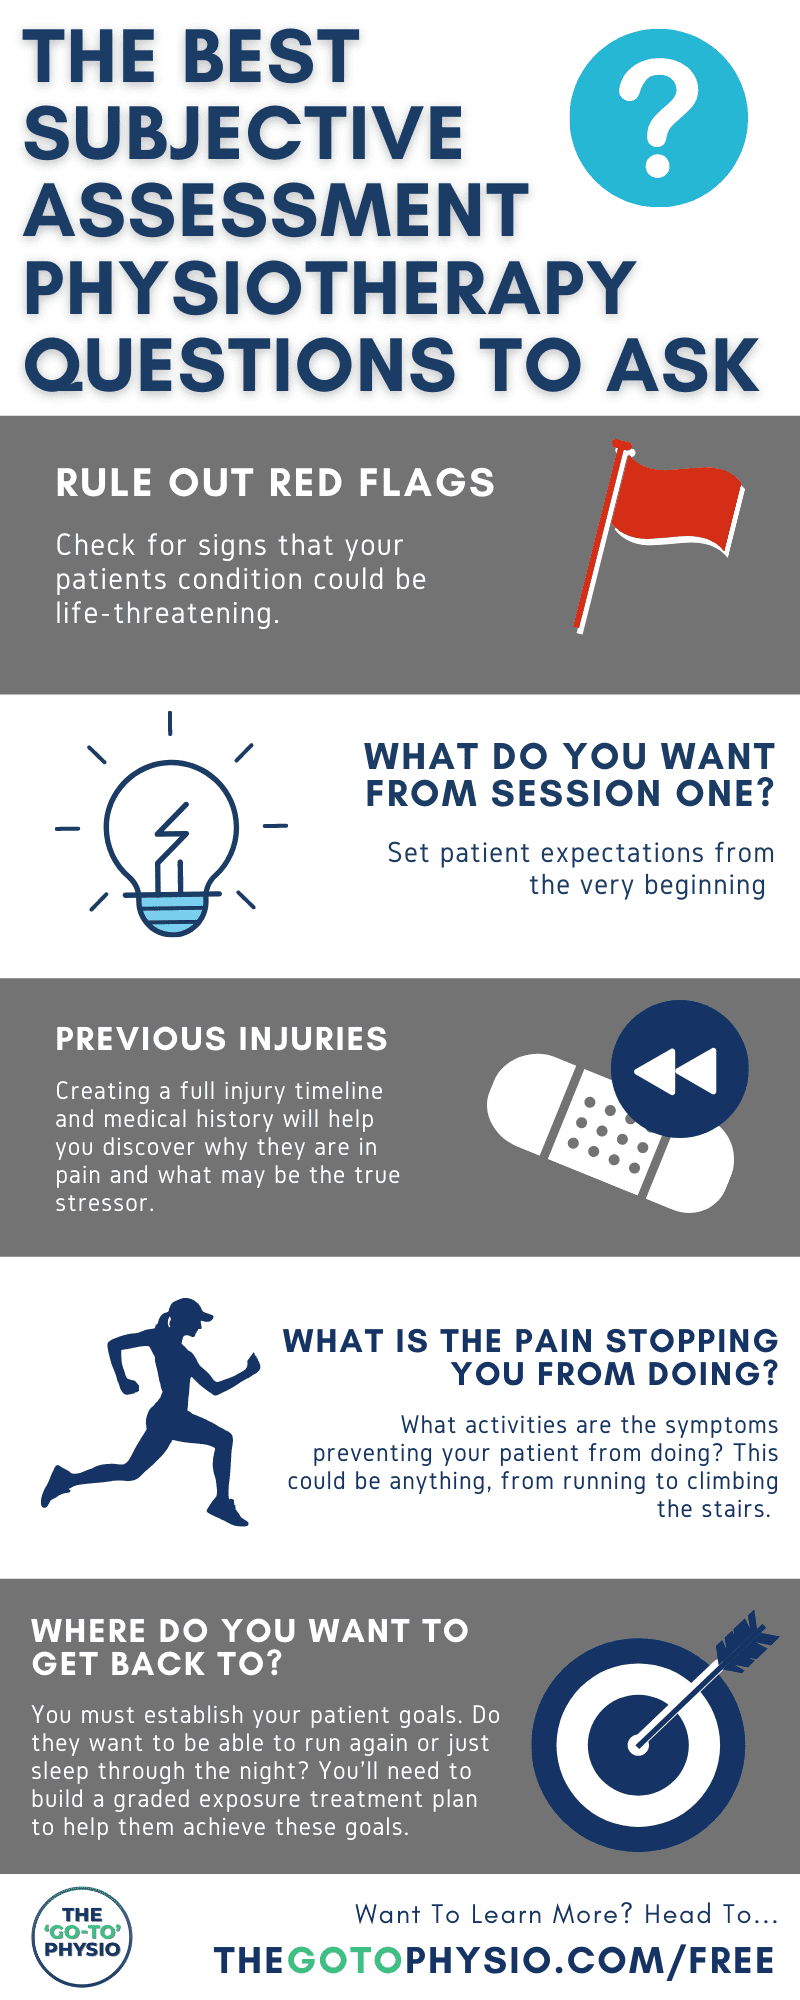 A timeline of injuries and stressors for your physiotherapy patient